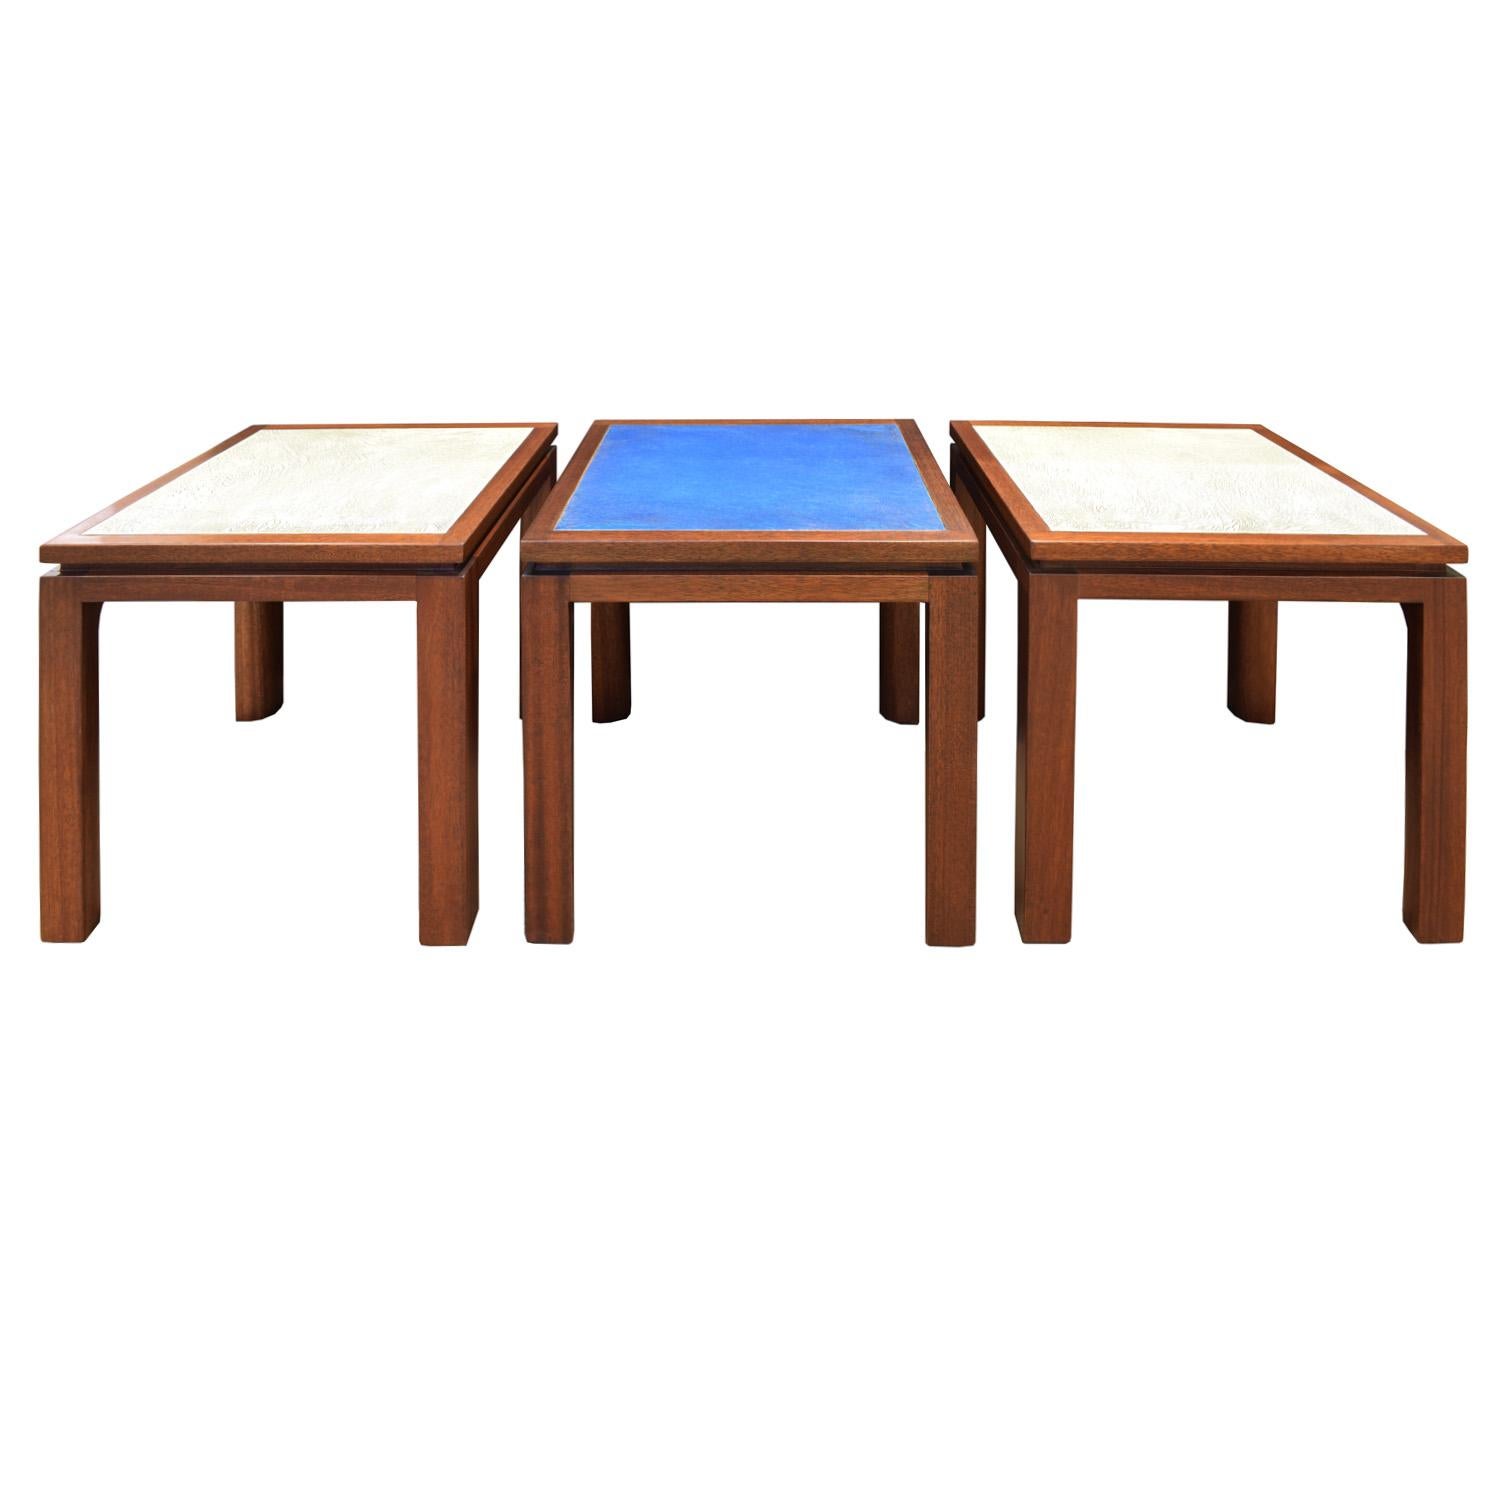 Set of 3 coffee/side tables model No 1145 in mahogany with hand fired white and blue 